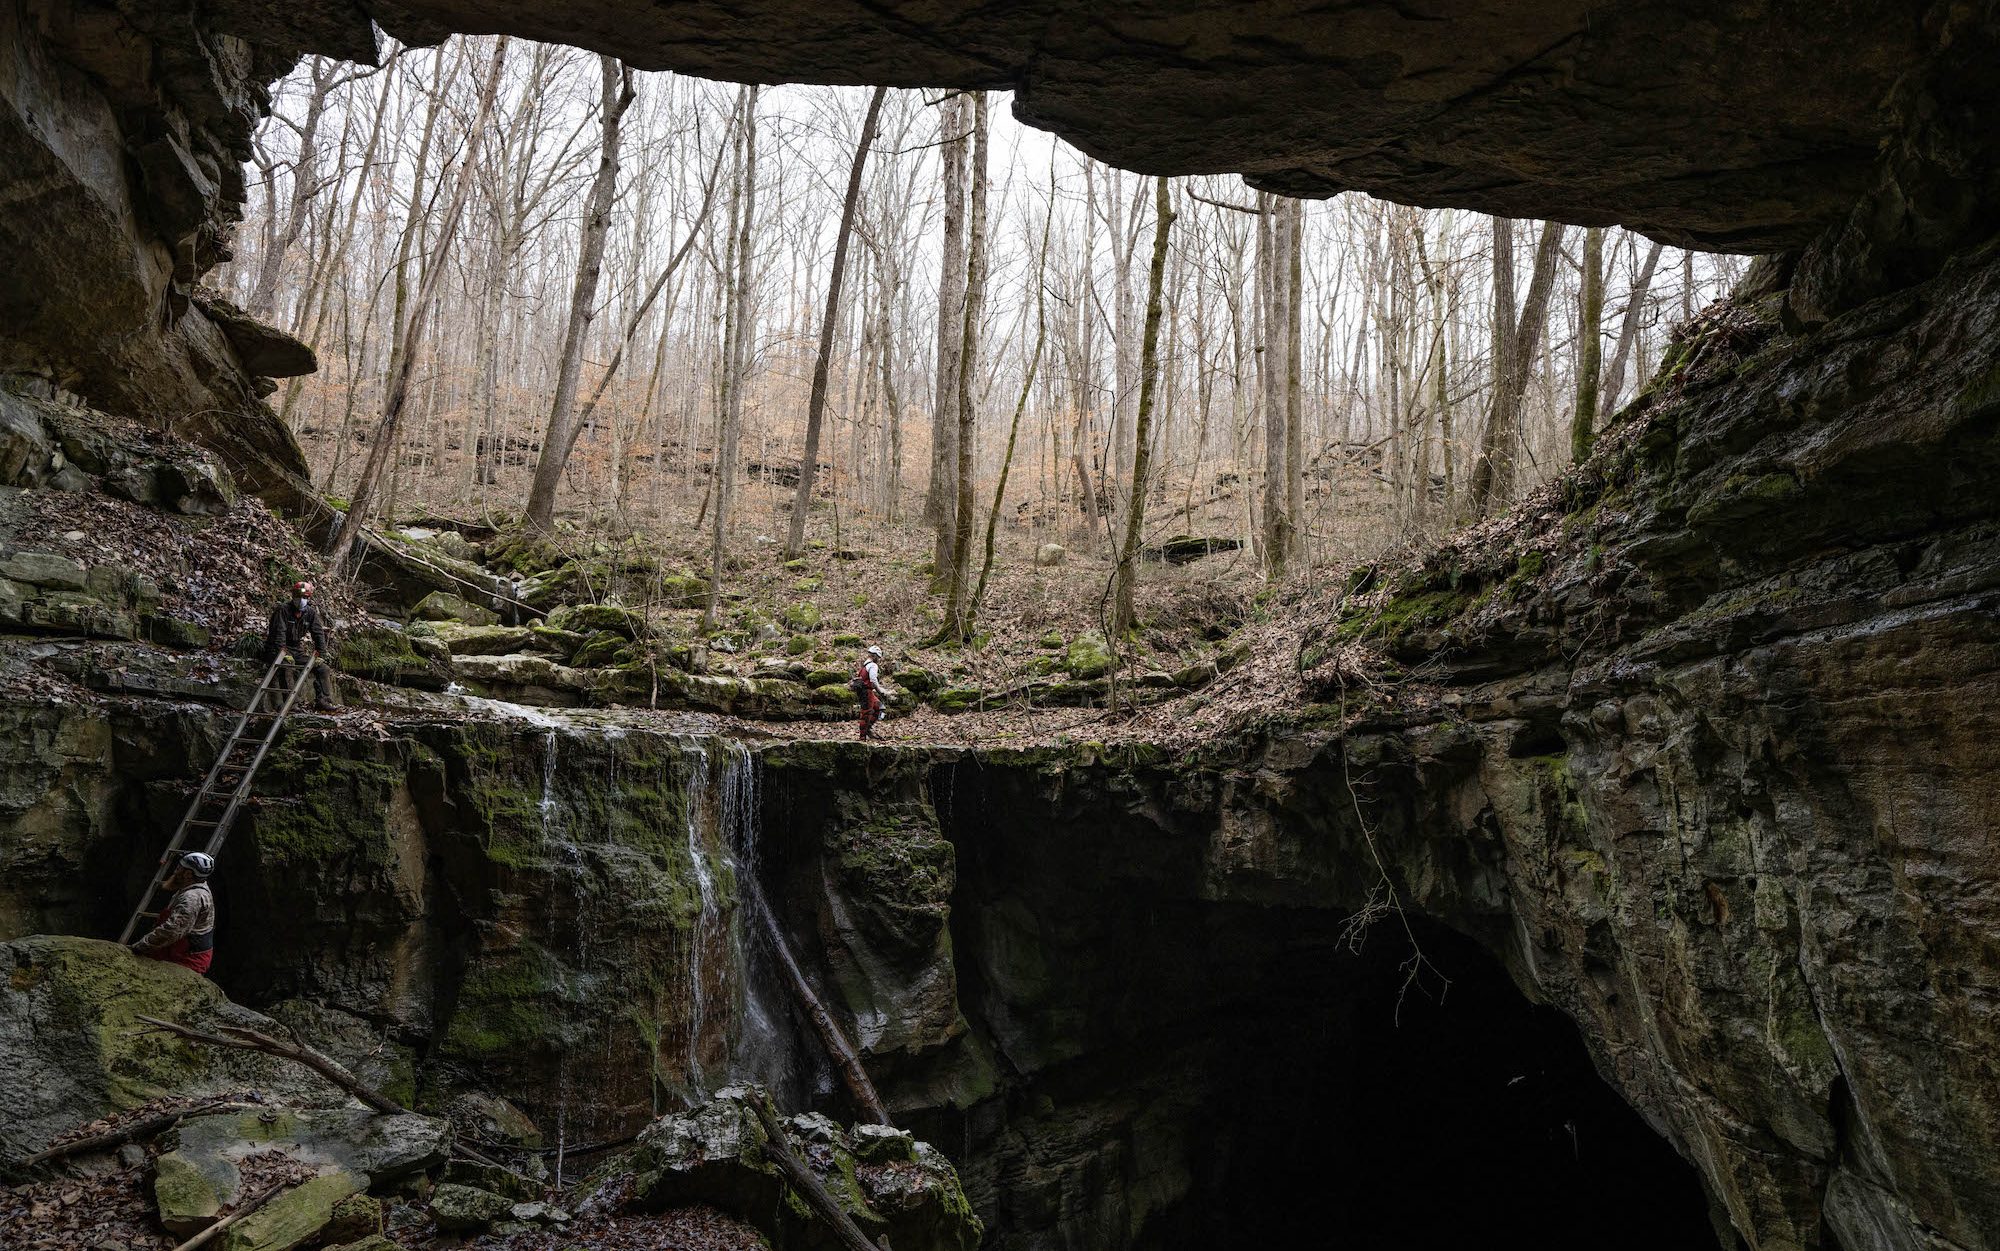 view of a forest through the opening of a cave mouth